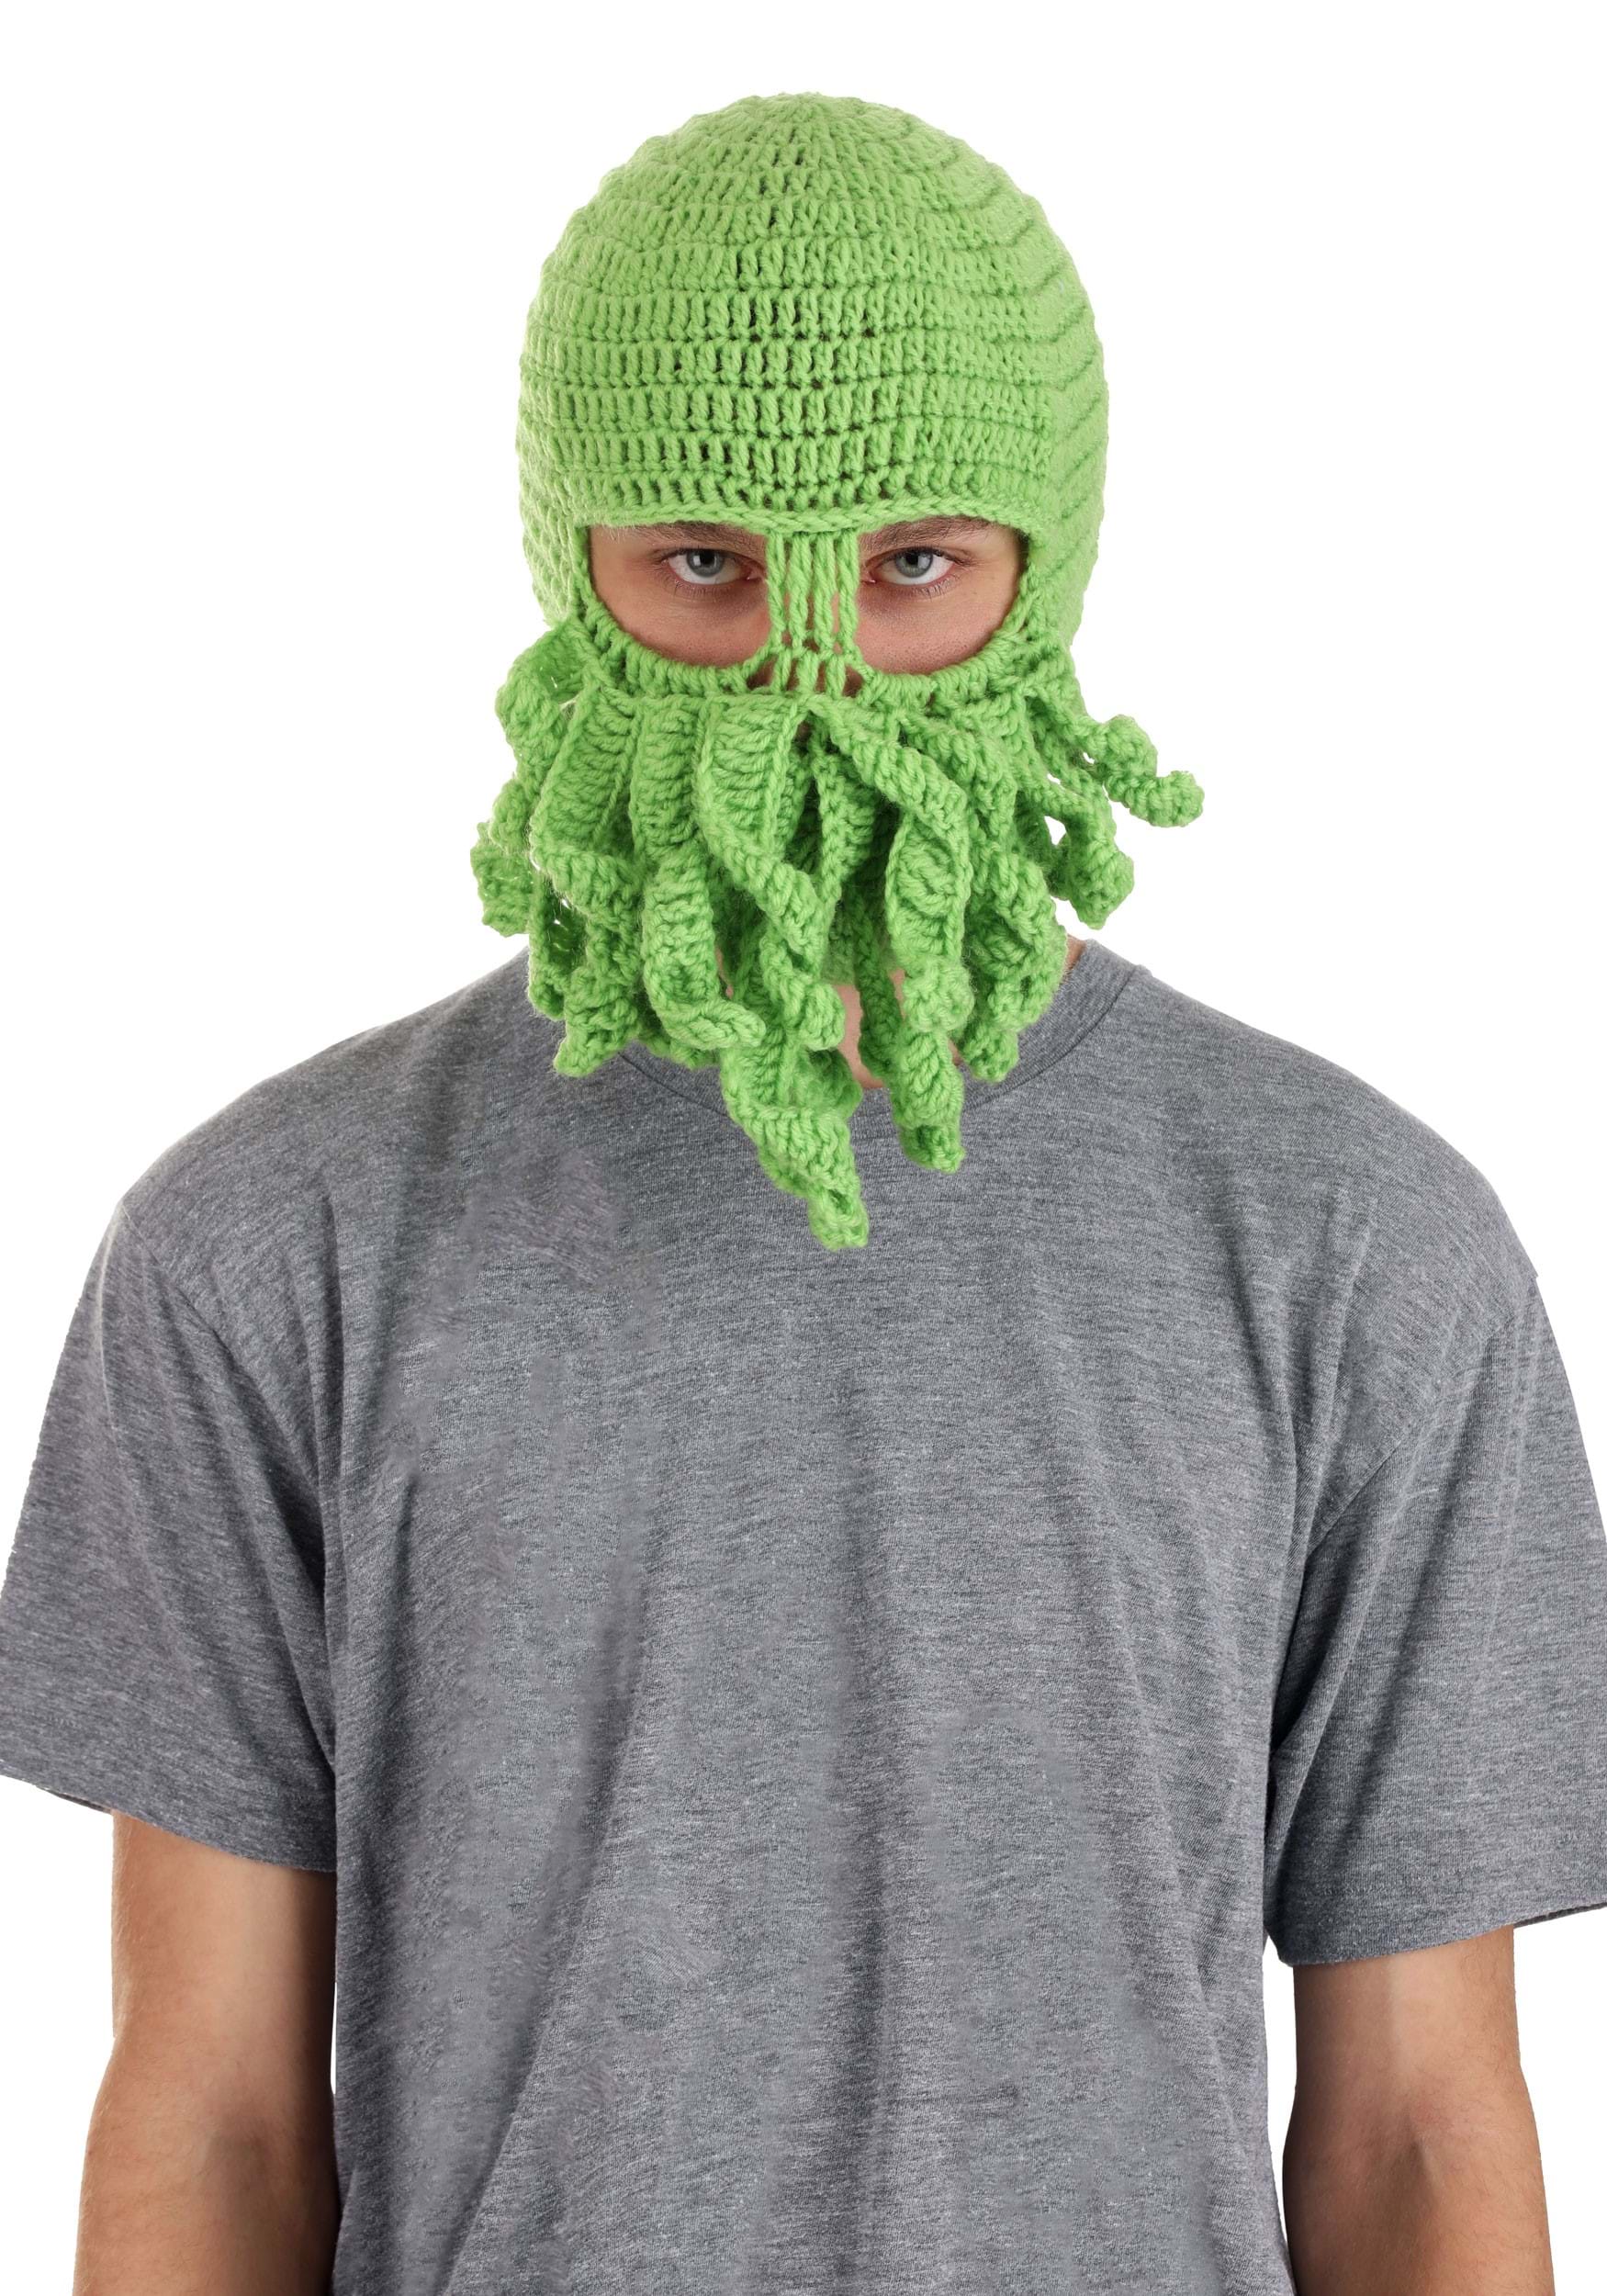 Photos - Fancy Dress Monster FUN Costumes Adult Knit Green Cthulhu Beanie |   Costume 